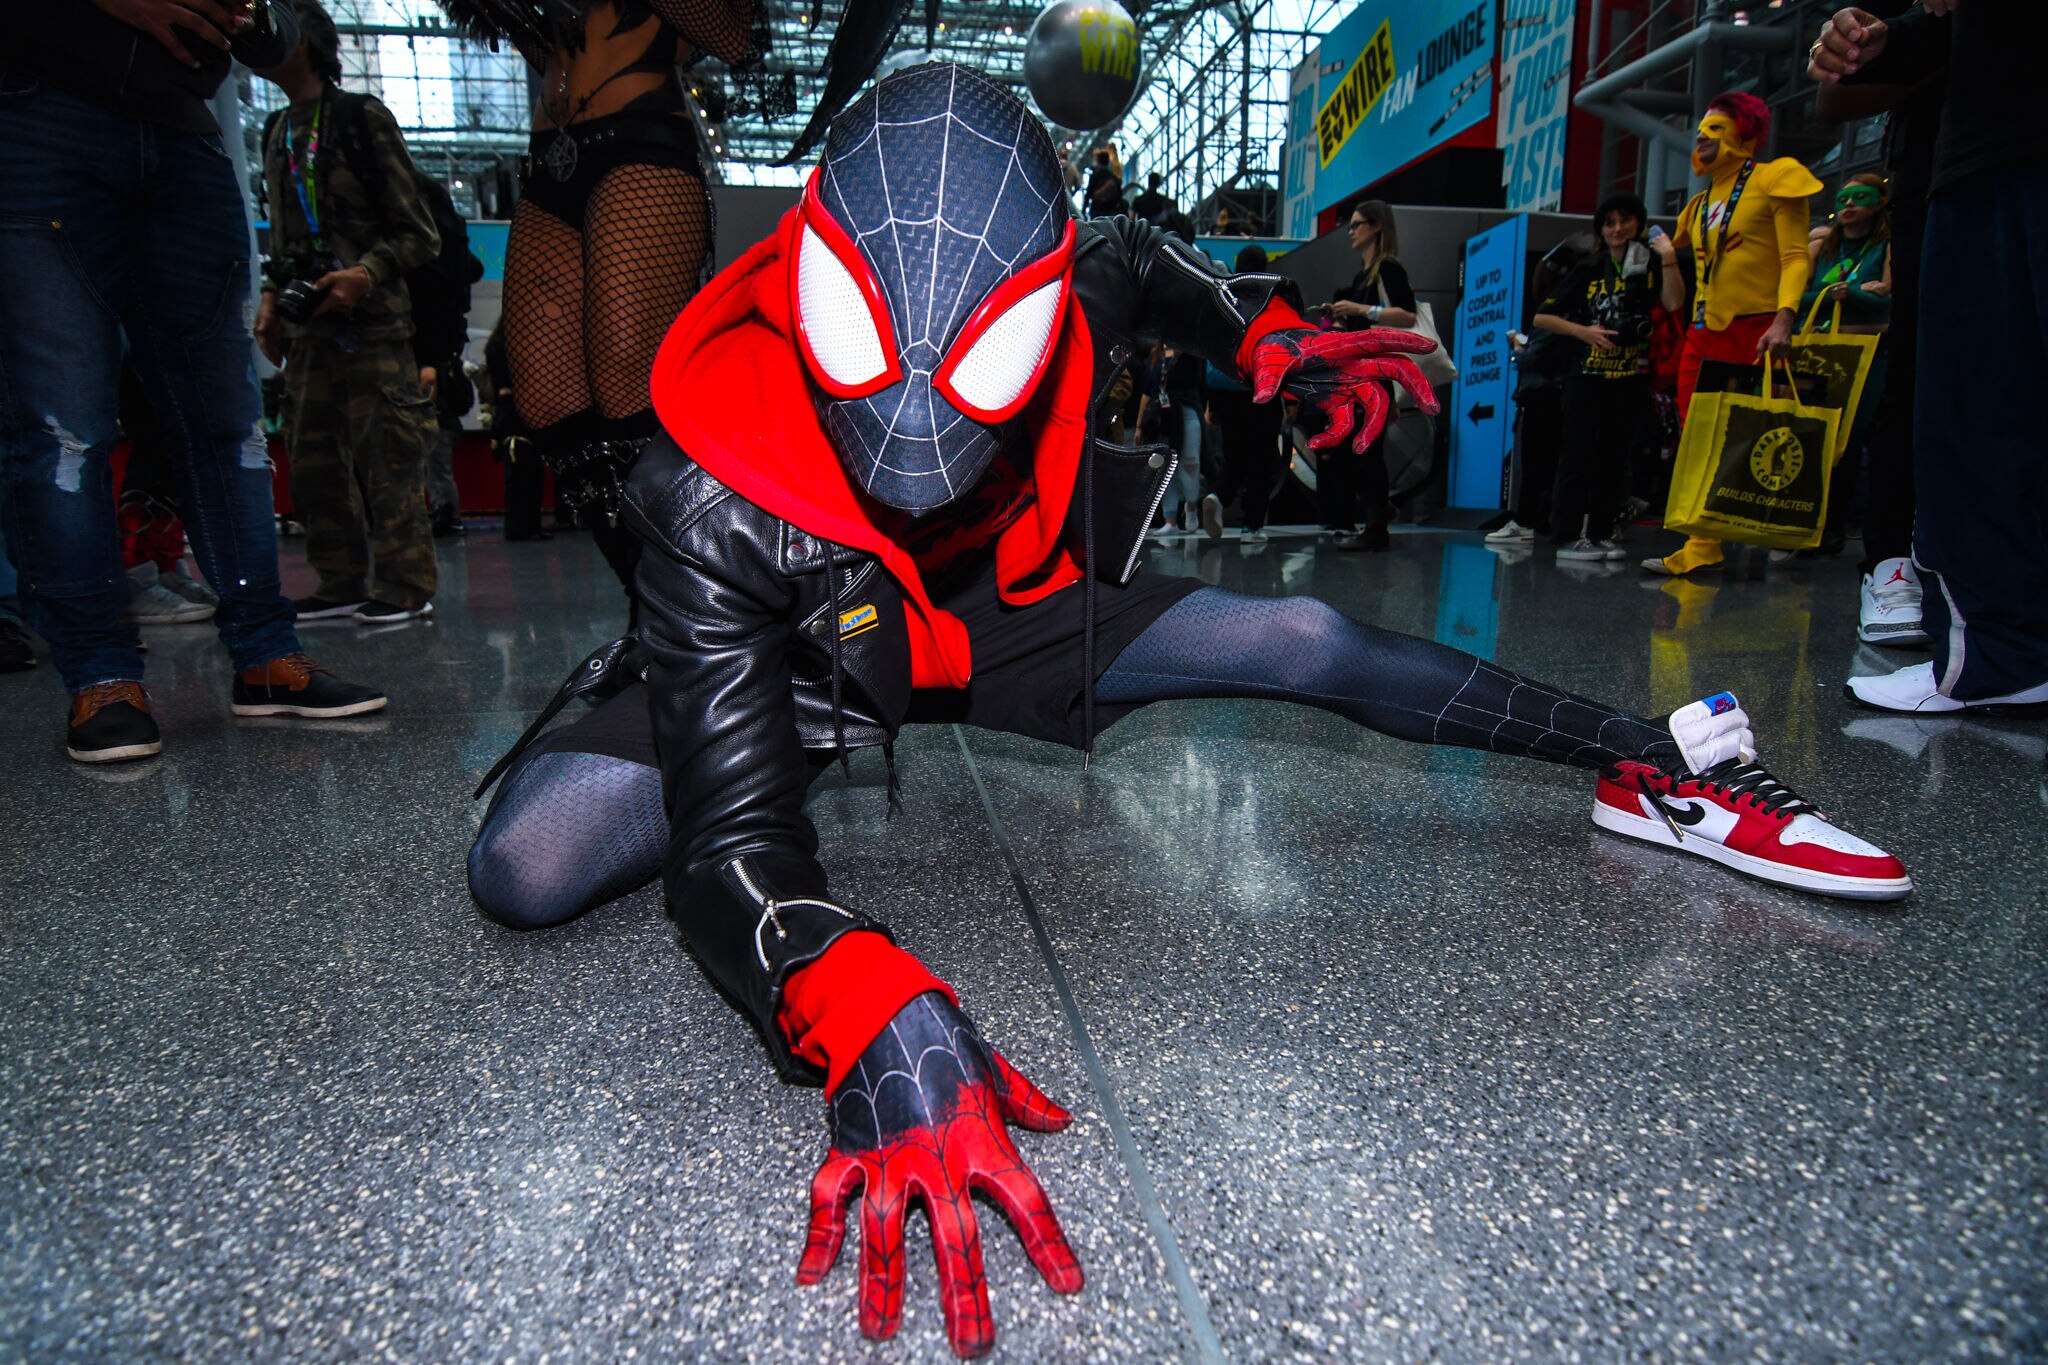 Nycc thursday 2019 cosplay day 1